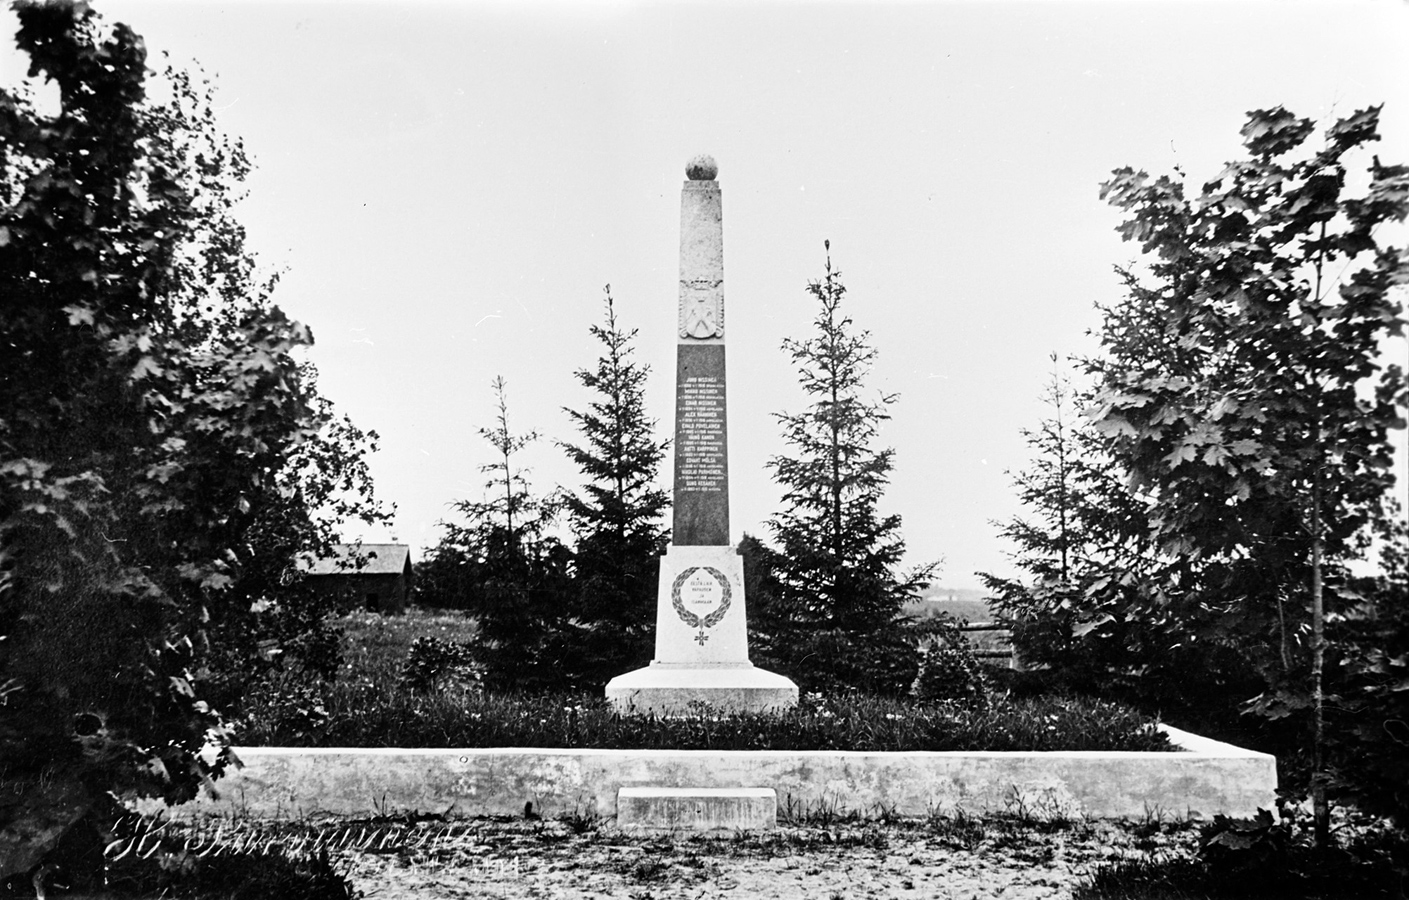 Early 1930's. The Monument of heroes 1918